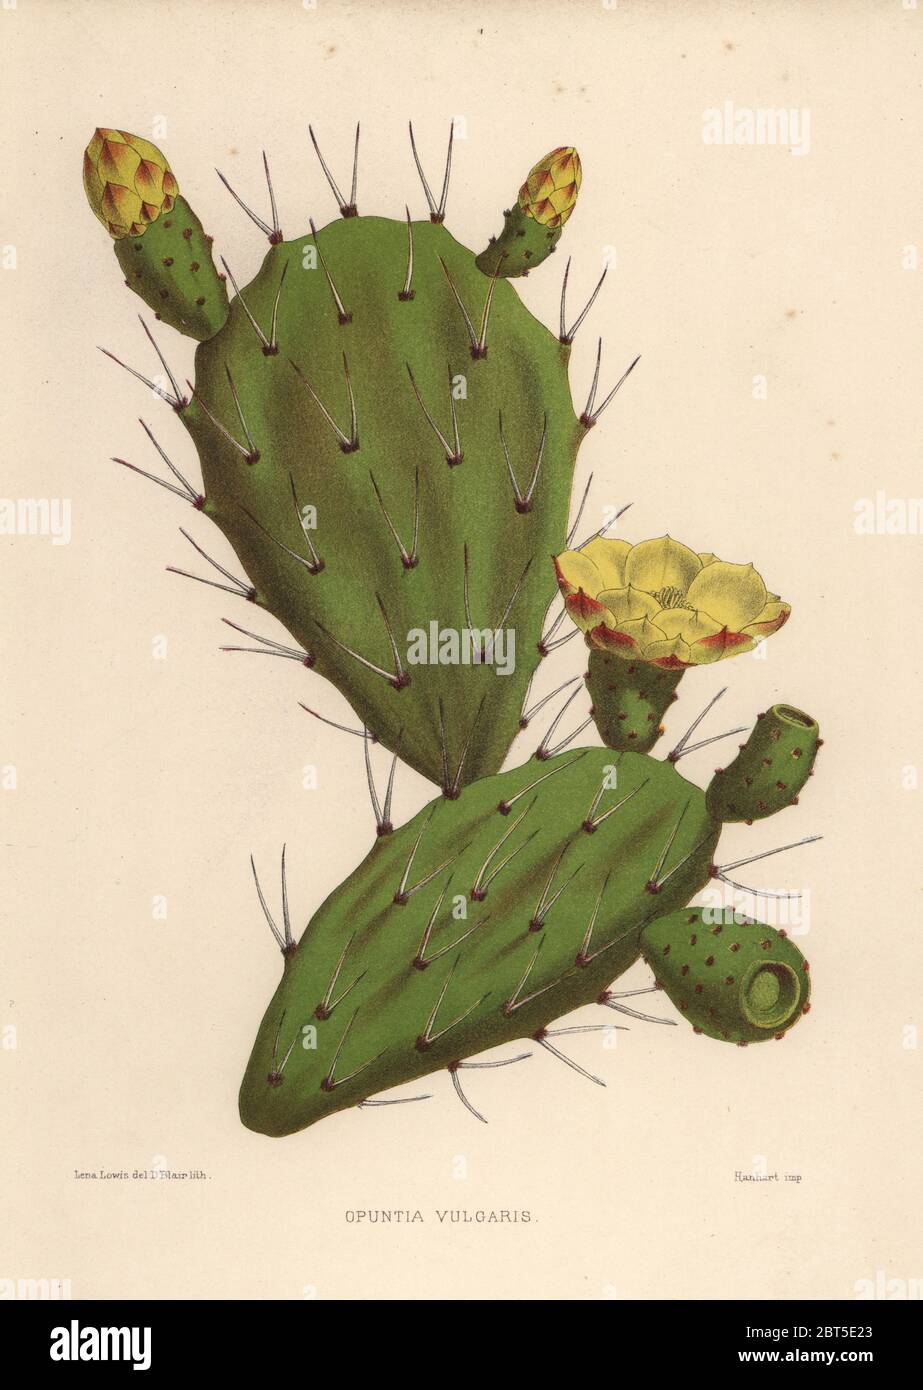 Eastern prickly pear, Opuntia ficus-indica (Opuntia vulgaris). Handcoloured lithograph by D. Blair after an illustration by Lena Lowis from her Familiar Indian Flowers with Coloured Plates, L. Reeve, London, 1878. Lena Lowis, formerly Selena Caroline Shakespear (1845-1919), was a British woman artist who traveled to India with her husband Lt.-Col. Ninian Lowis. Stock Photo